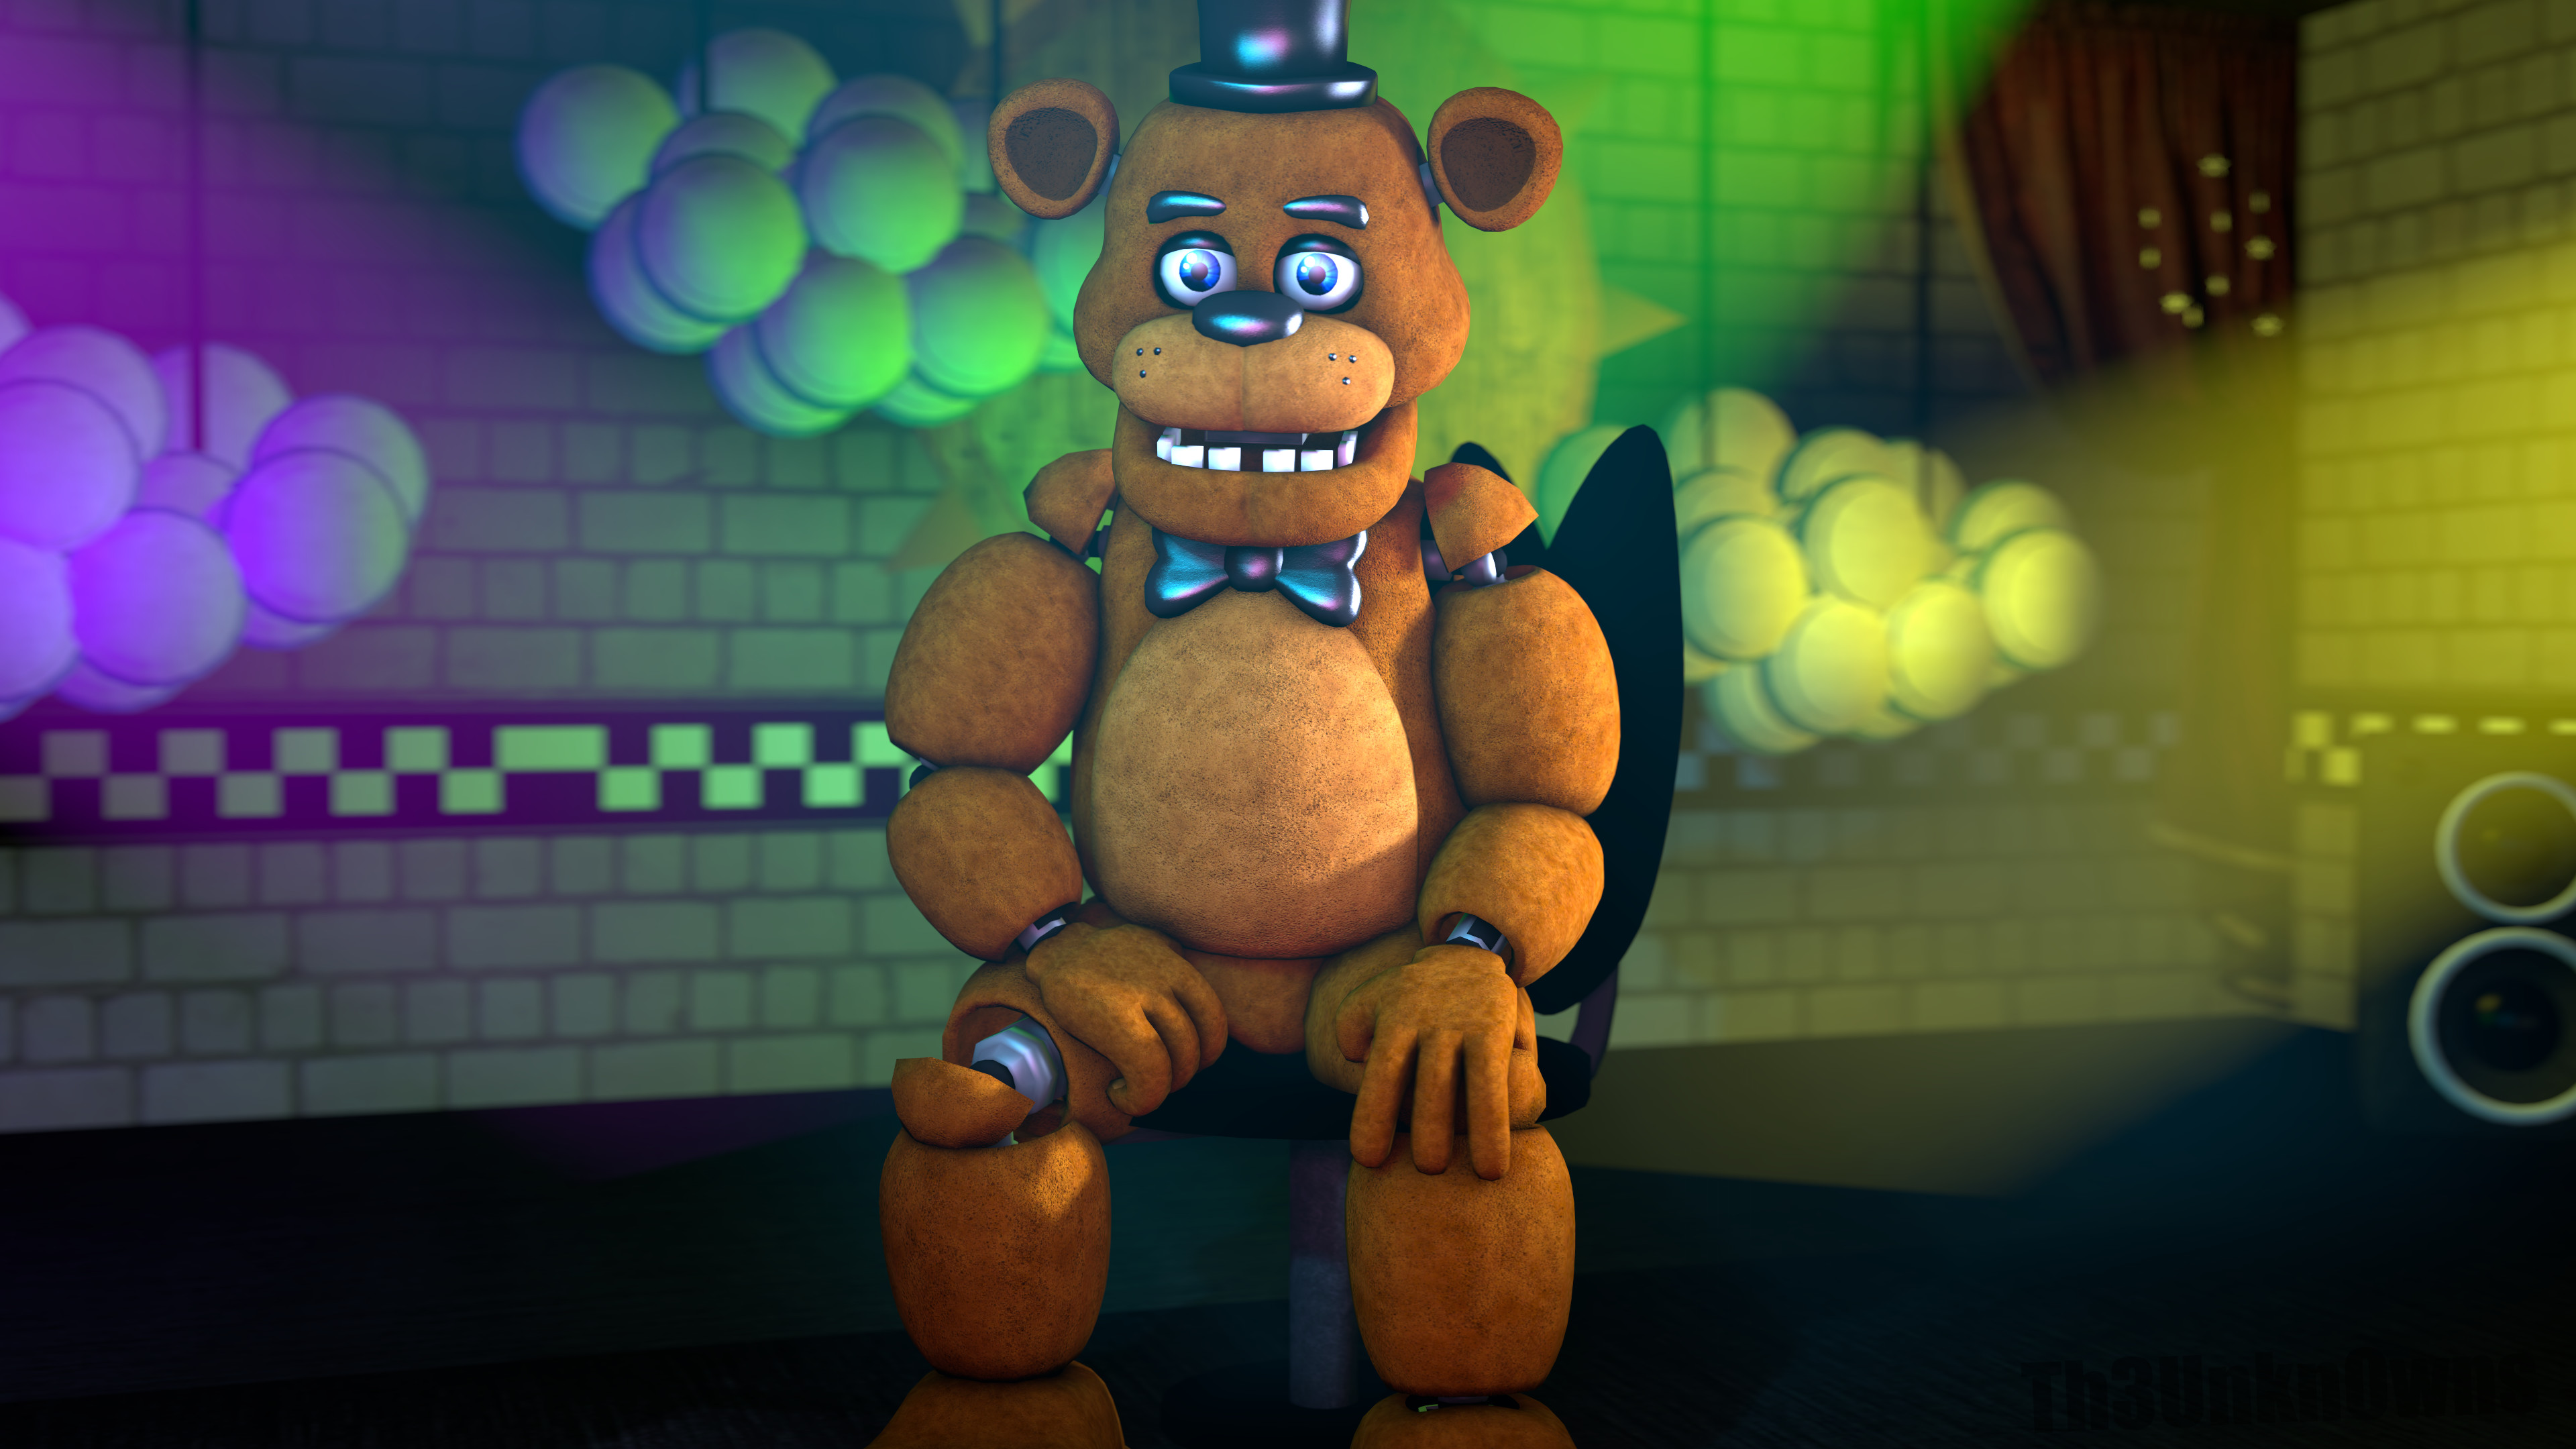 20+ Freddy (Five Nights at Freddy's) HD Wallpapers and Backgrounds